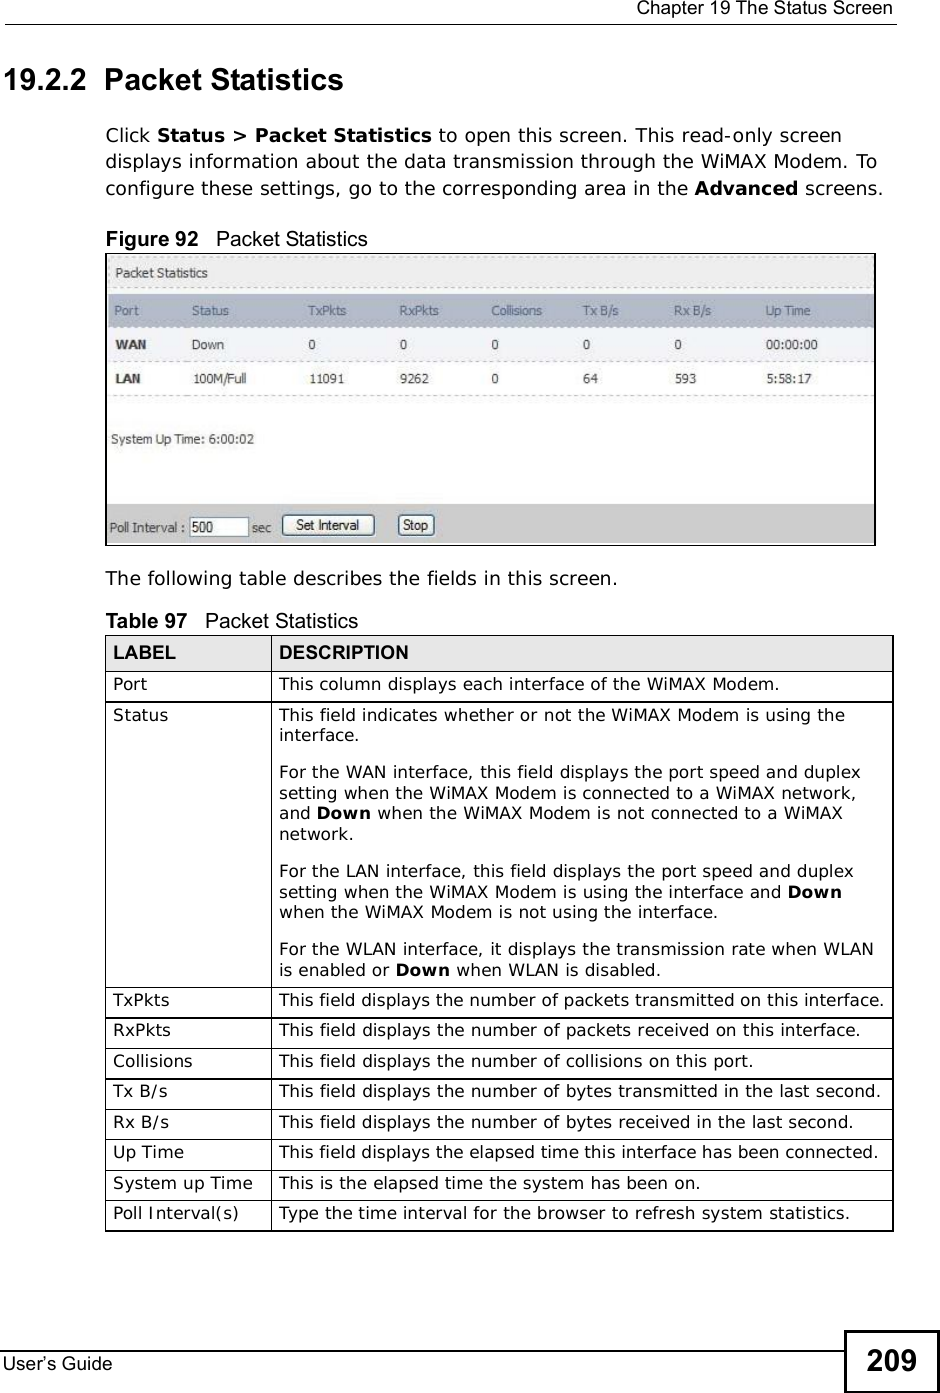  Chapter 19The Status ScreenUser s Guide 20919.2.2  Packet StatisticsClick Status &gt; Packet Statistics to open this screen. This read-only screen displays information about the data transmission through the WiMAX Modem. To configure these settings, go to the corresponding area in the Advanced screens.Figure 92   Packet StatisticsThe following table describes the fields in this screen.  Table 97   Packet StatisticsLABEL DESCRIPTIONPortThis column displays each interface of the WiMAX Modem.Status This field indicates whether or not the WiMAX Modem is using the interface.For the WAN interface, this field displays the port speed and duplex setting when the WiMAX Modem is connected to a WiMAX network, and Down when the WiMAX Modem is not connected to a WiMAX network.For the LAN interface, this field displays the port speed and duplex setting when the WiMAX Modem is using the interface and Downwhen the WiMAX Modem is not using the interface.For the WLAN interface, it displays the transmission rate when WLAN is enabled or Down when WLAN is disabled.TxPkts  This field displays the number of packets transmitted on this interface.RxPkts  This field displays the number of packets received on this interface.Collisions This field displays the number of collisions on this port.Tx B/s  This field displays the number of bytes transmitted in the last second.Rx B/s This field displays the number of bytes received in the last second.Up Time  This field displays the elapsed time this interface has been connected. System up Time This is the elapsed time the system has been on.Poll Interval(s) Type the time interval for the browser to refresh system statistics.